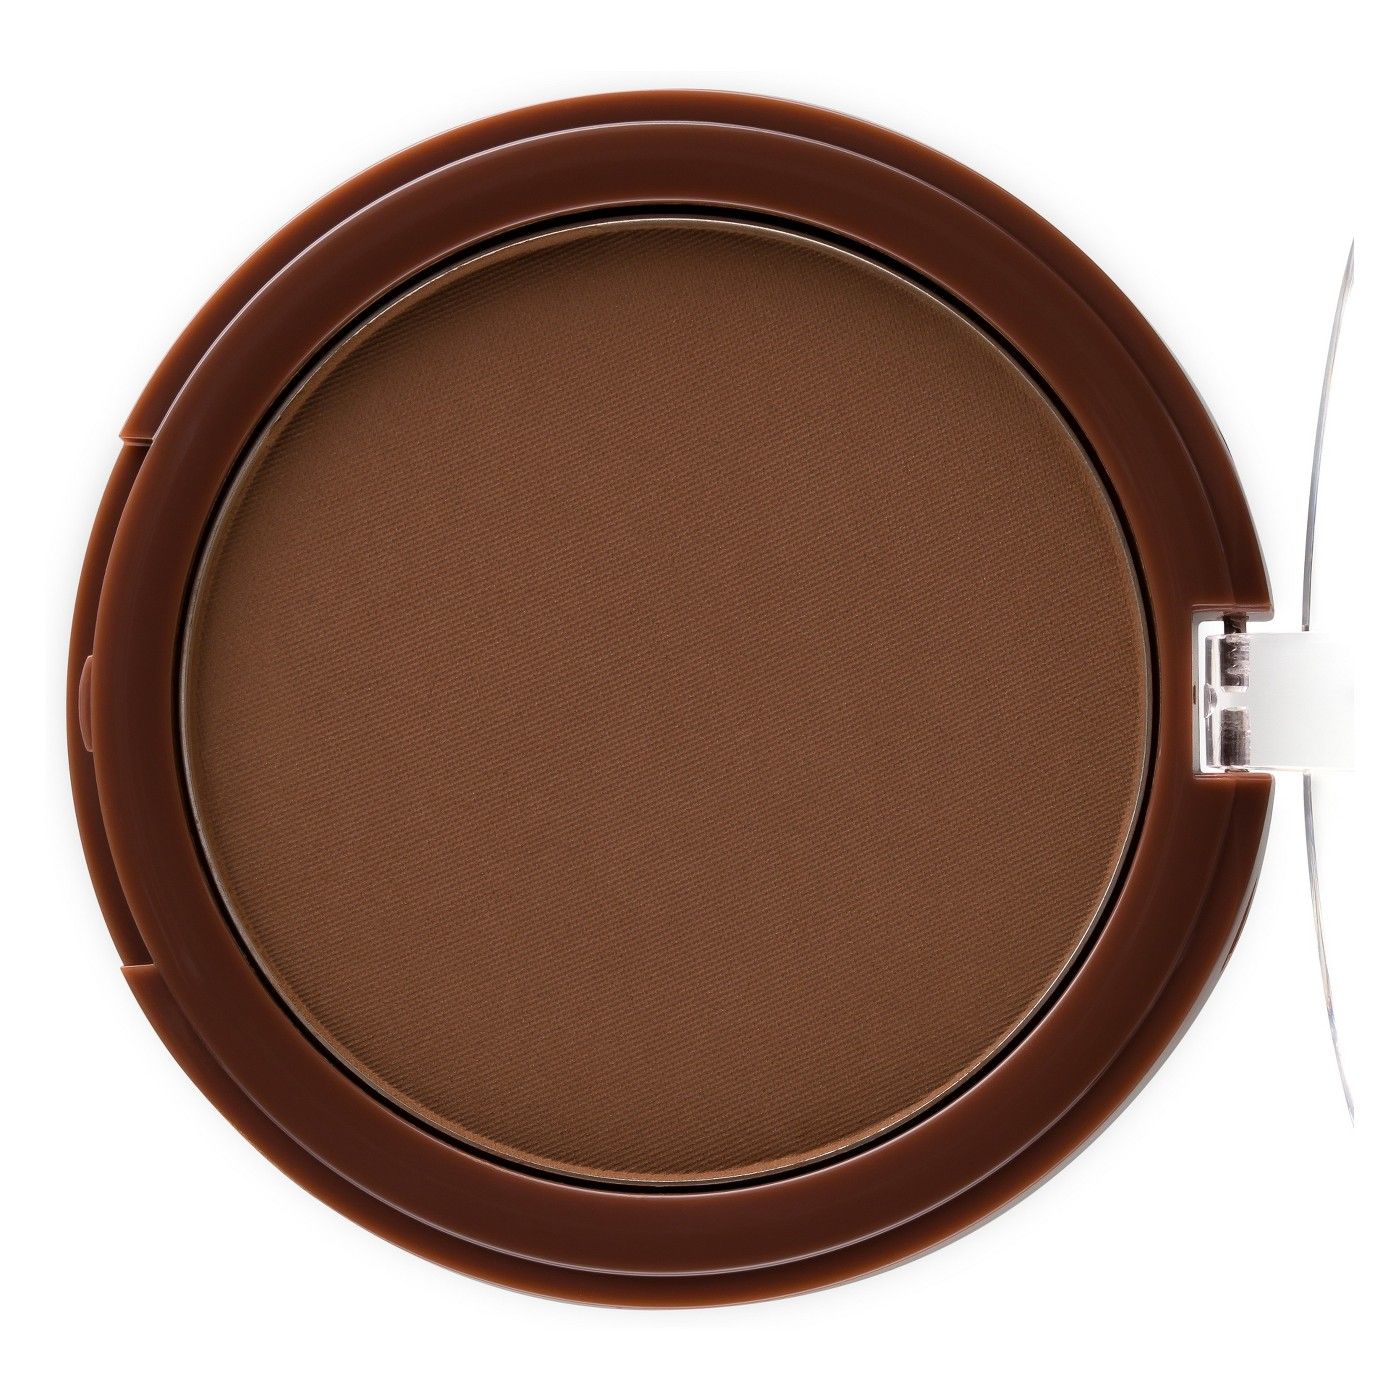 Brown, Serving tray, Product, Tan, Dishware, Platter, Dinnerware set, Cookware and bakeware, Tray, Pizza stone, 